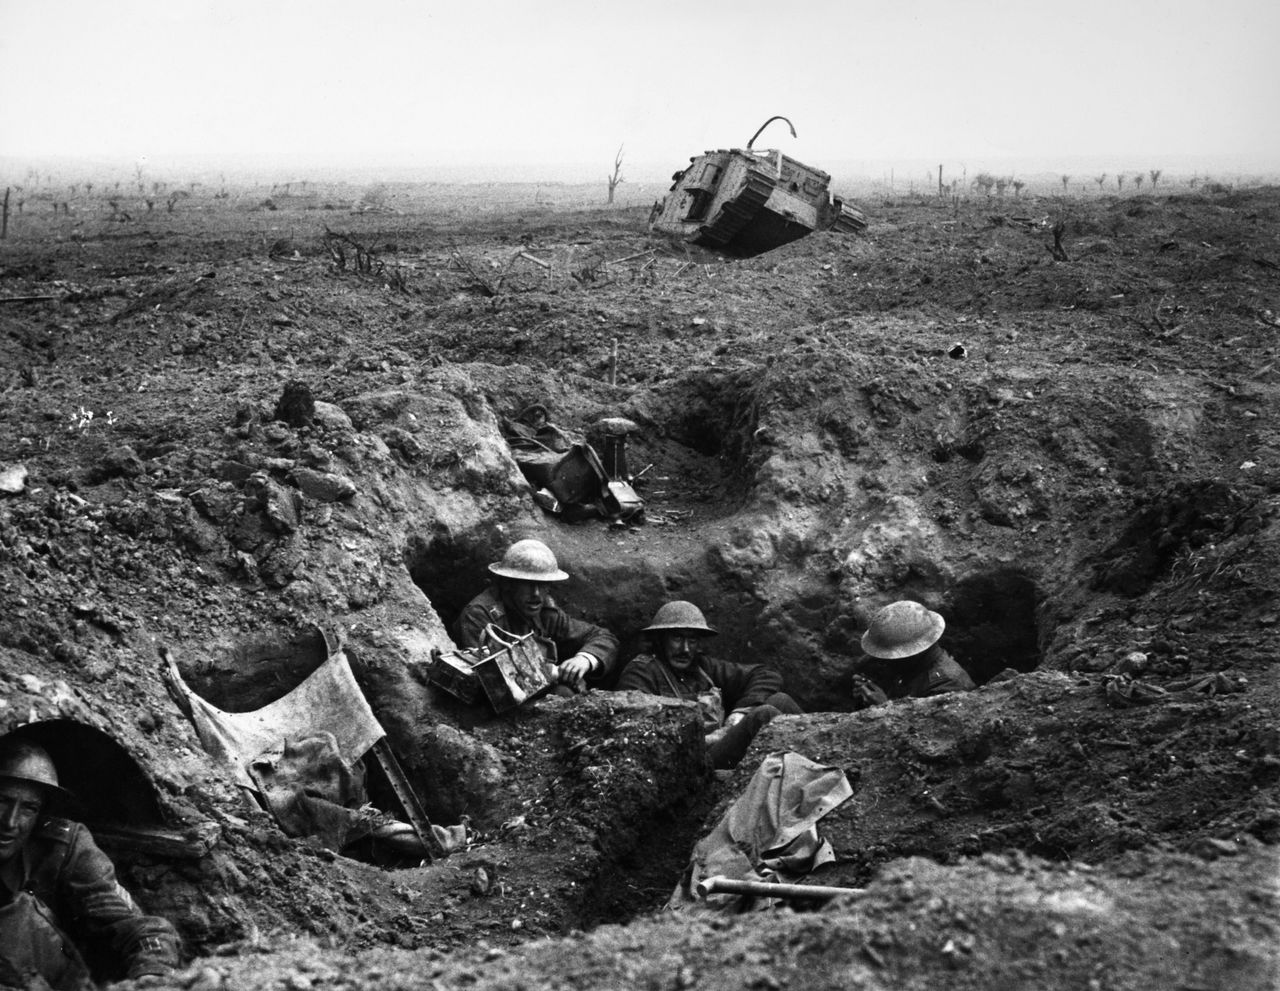 British troops in a trench at the Battle of Passchendaele on 22 September 1917